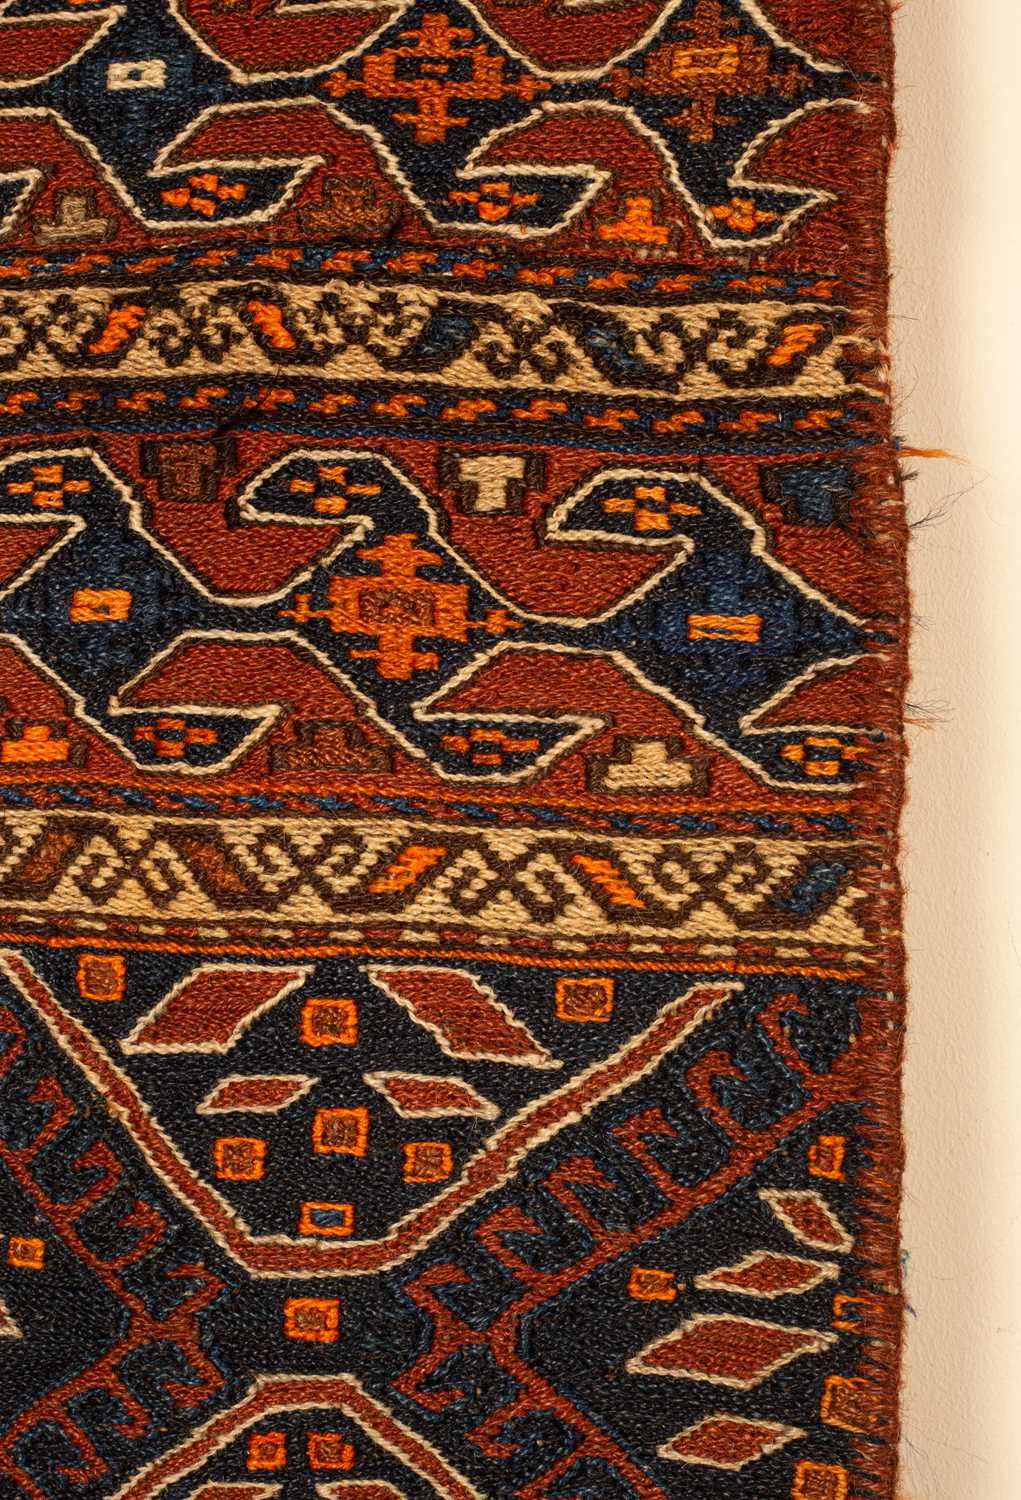 A Soumakh style rug or hanging - Image 3 of 8